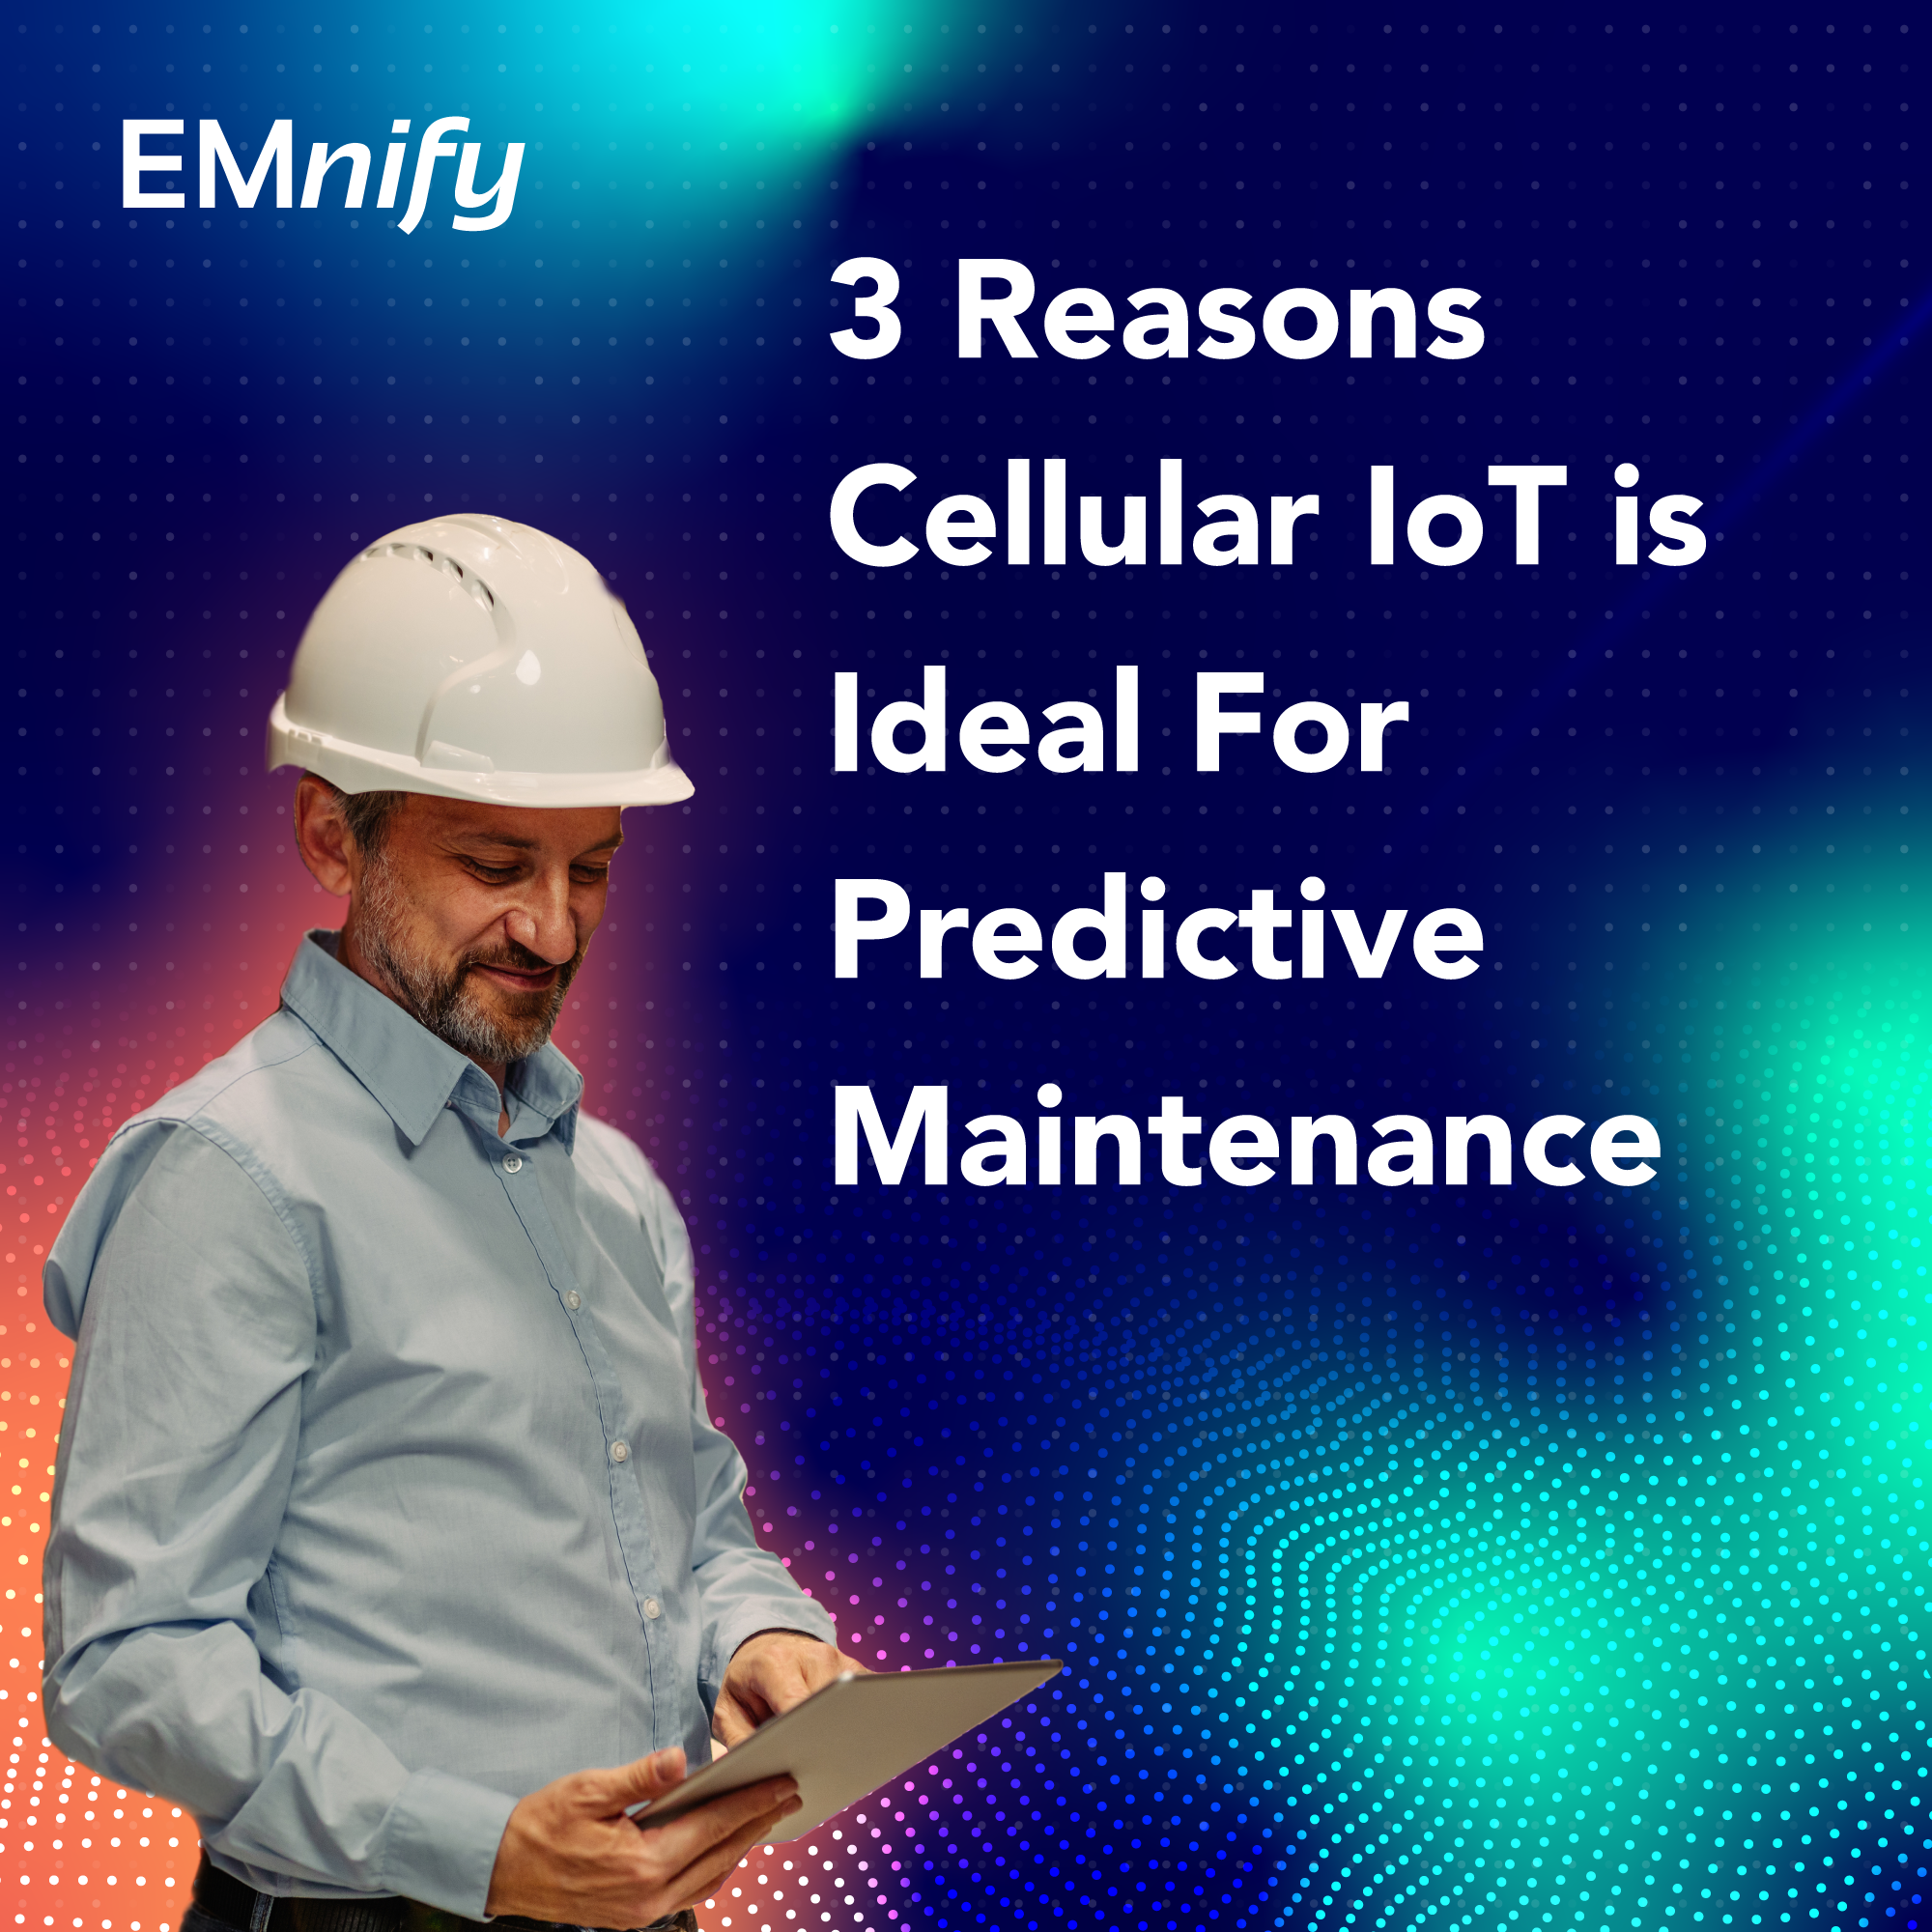 Image for post 3 Reasons Why Cellular IoT is Ideal for Predictive Maintenance